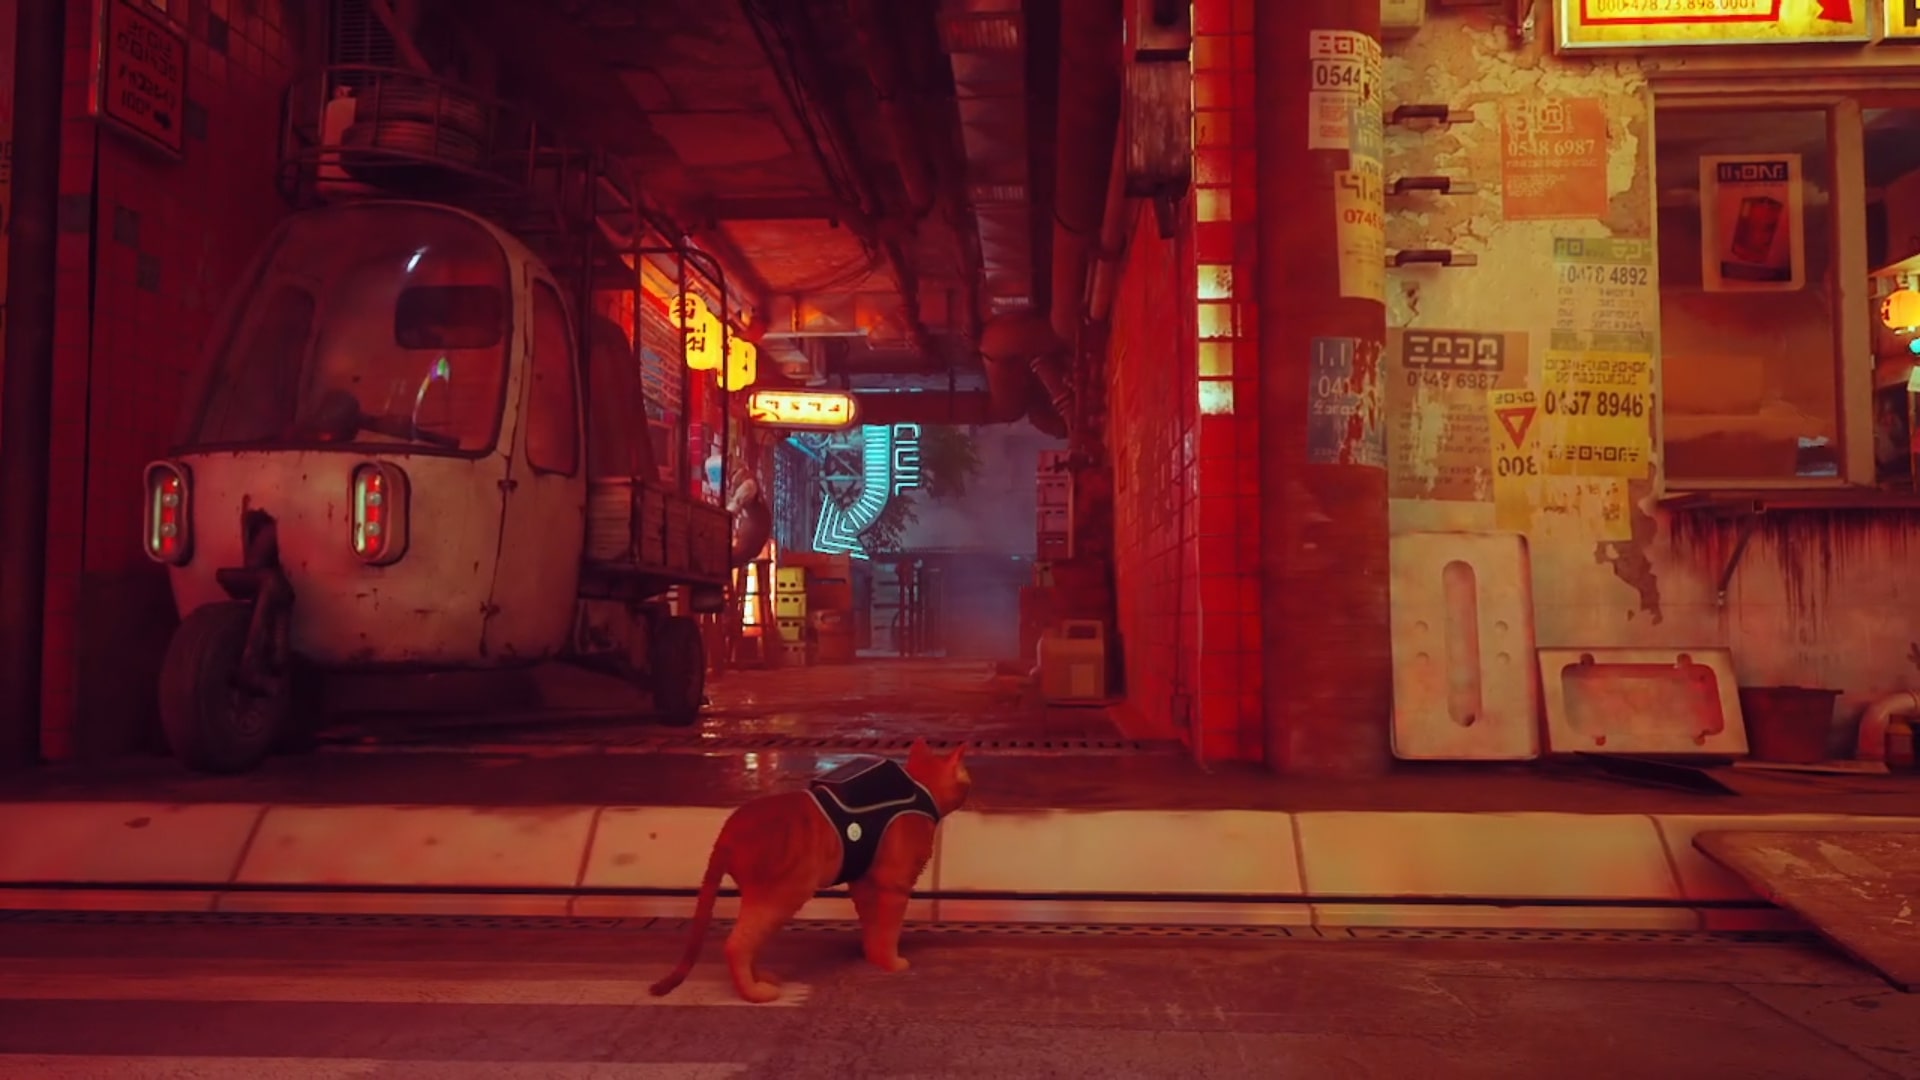 Stray memories guide: The orange tabby standing at the mouth of the alleyway between a compact delivery vehicle and the barbershop. At the end of the alleyway, a floating neon arrow can be seen pointing to the left